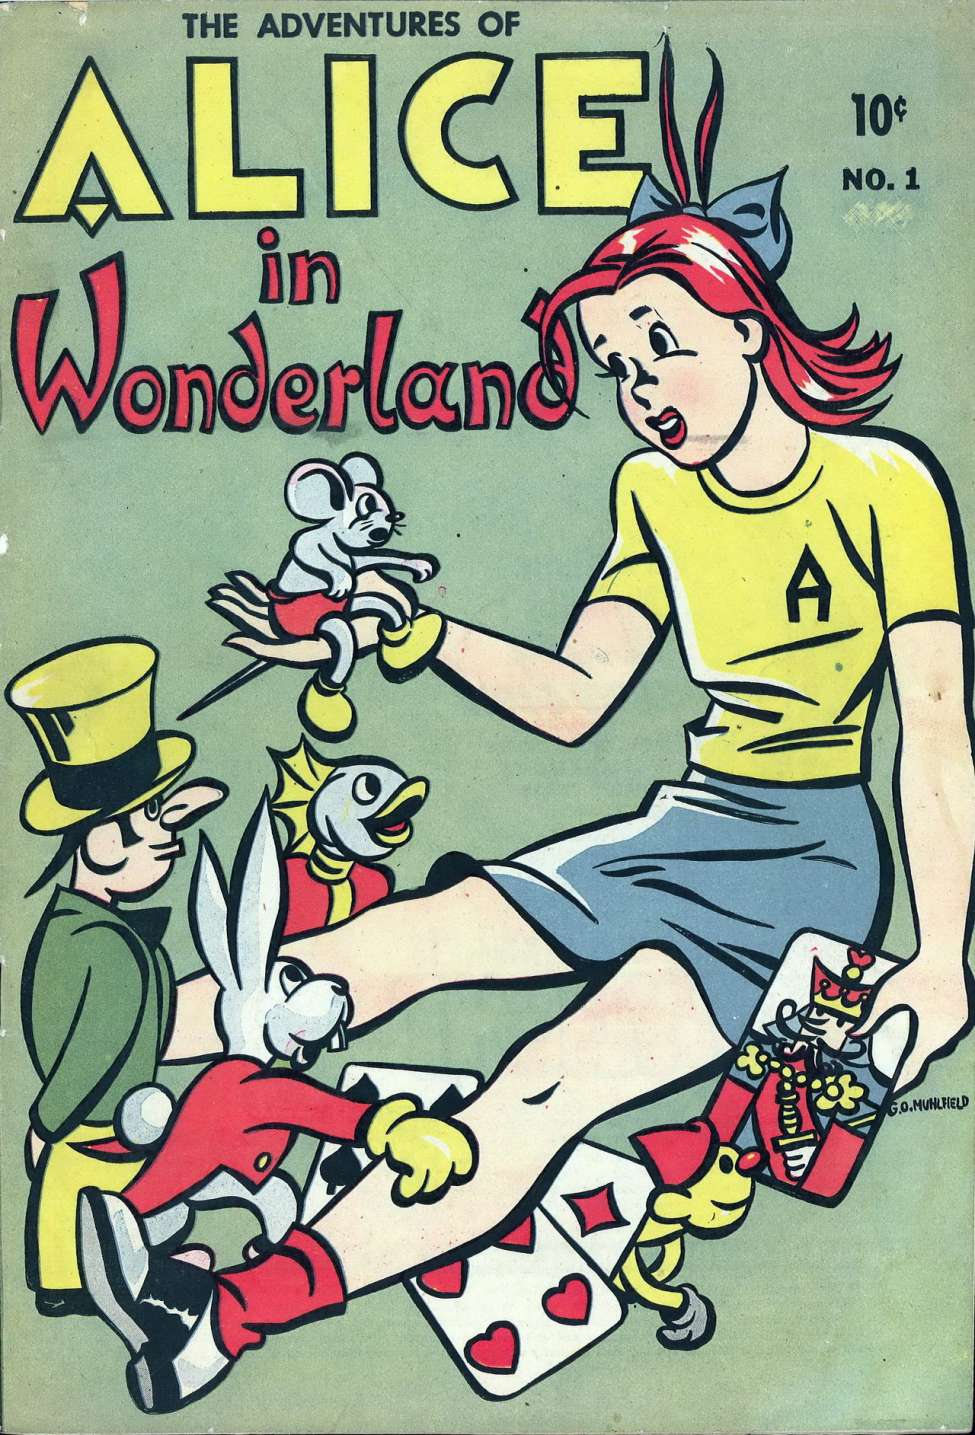 Book Cover For The Adventures Of Alice 1